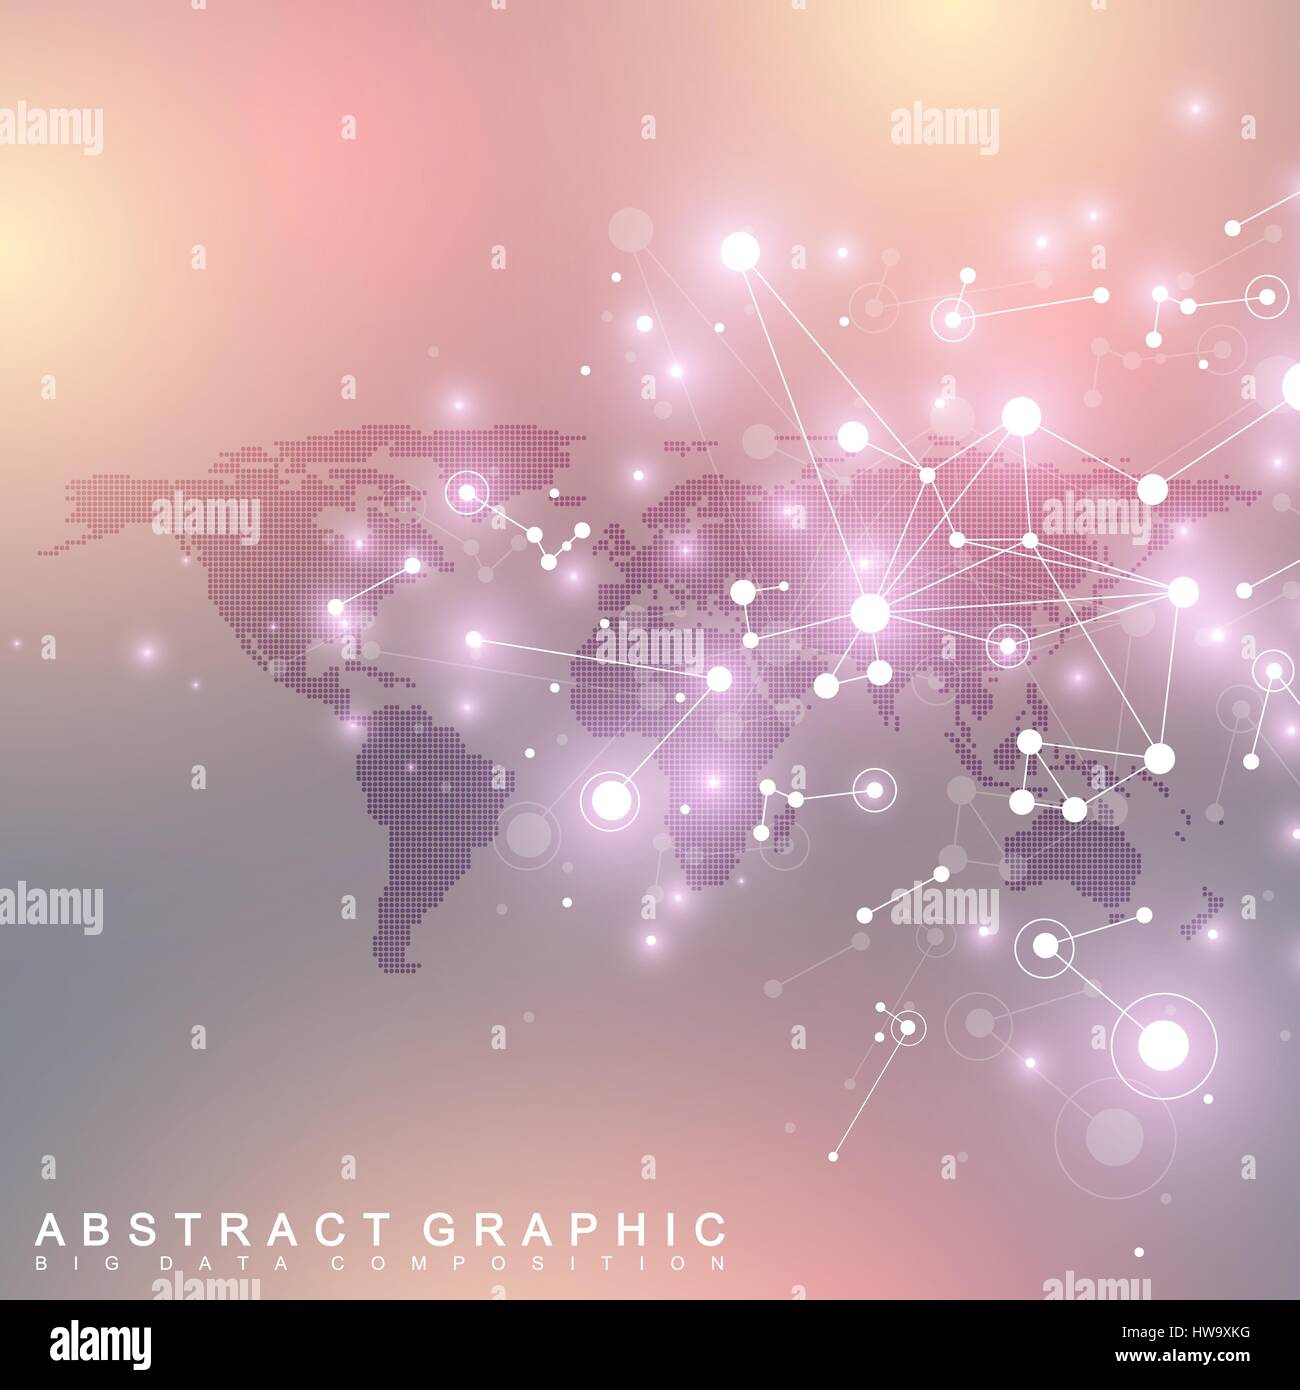 Dotted World Map with global technology networking concept. Digital data visualization. Scientific cybernetic particle compounds. Big Data background communication. Vector illustration. Stock Vector